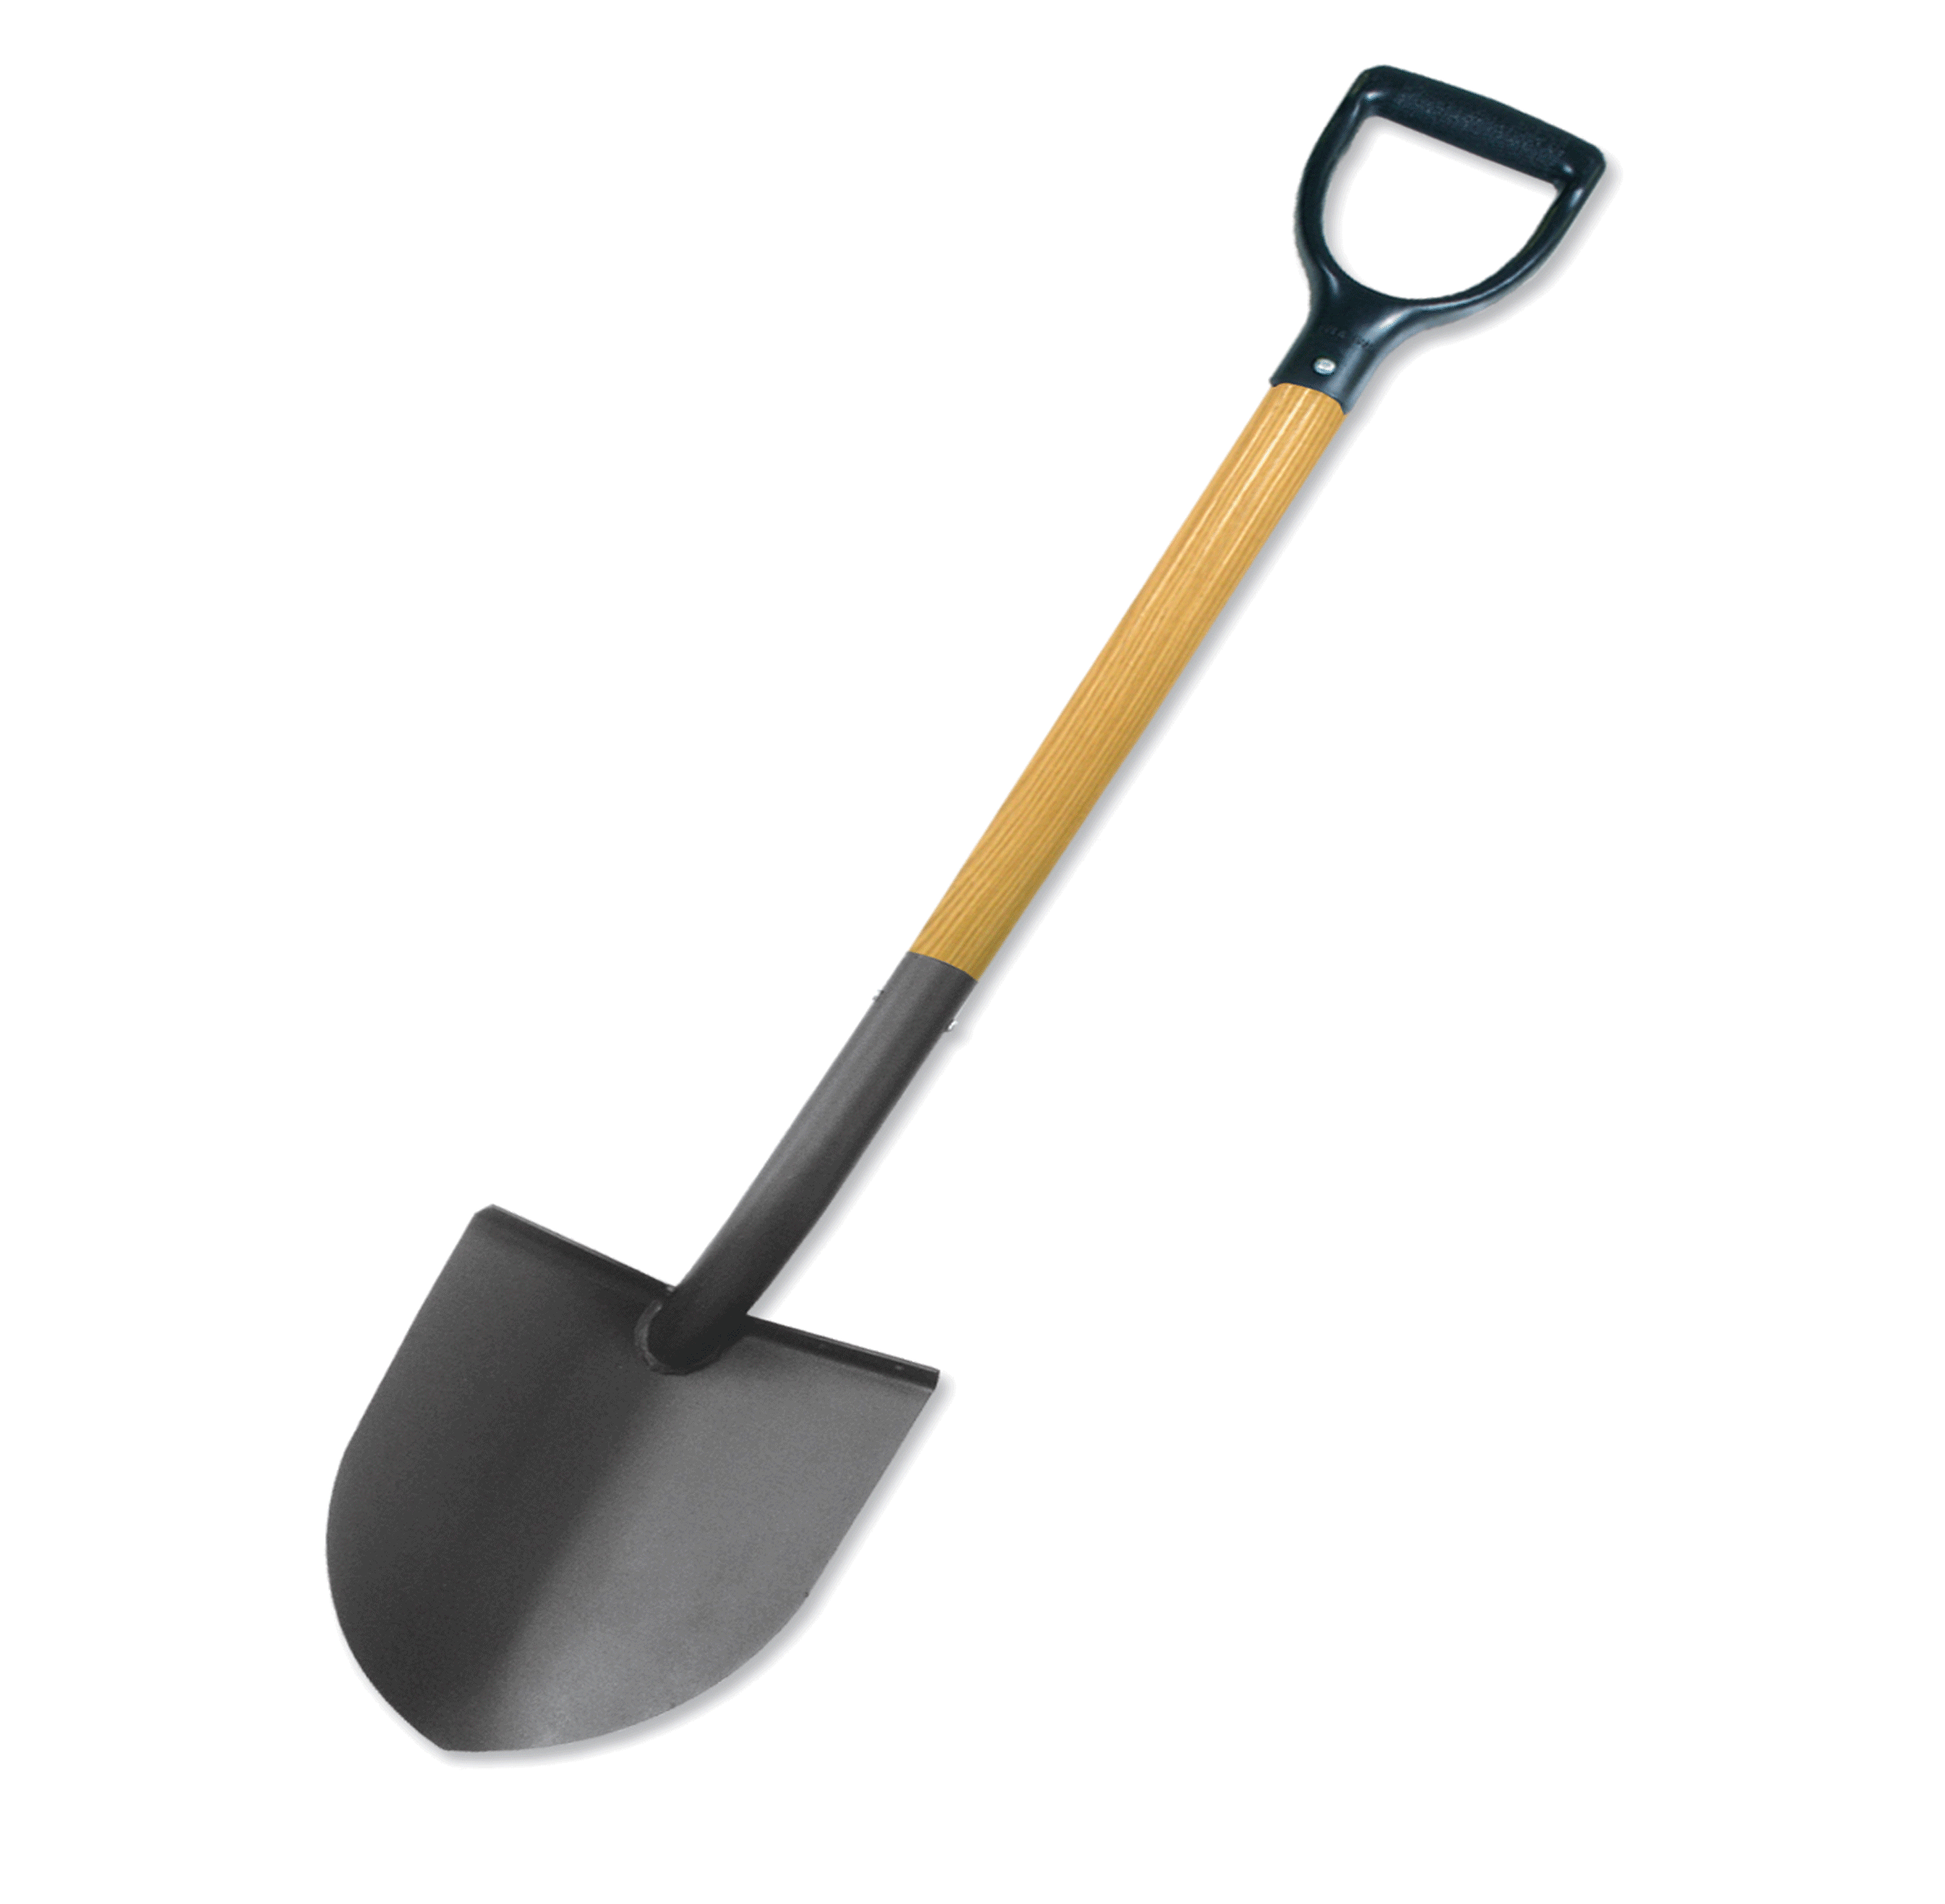 Agricultural spade, Product K